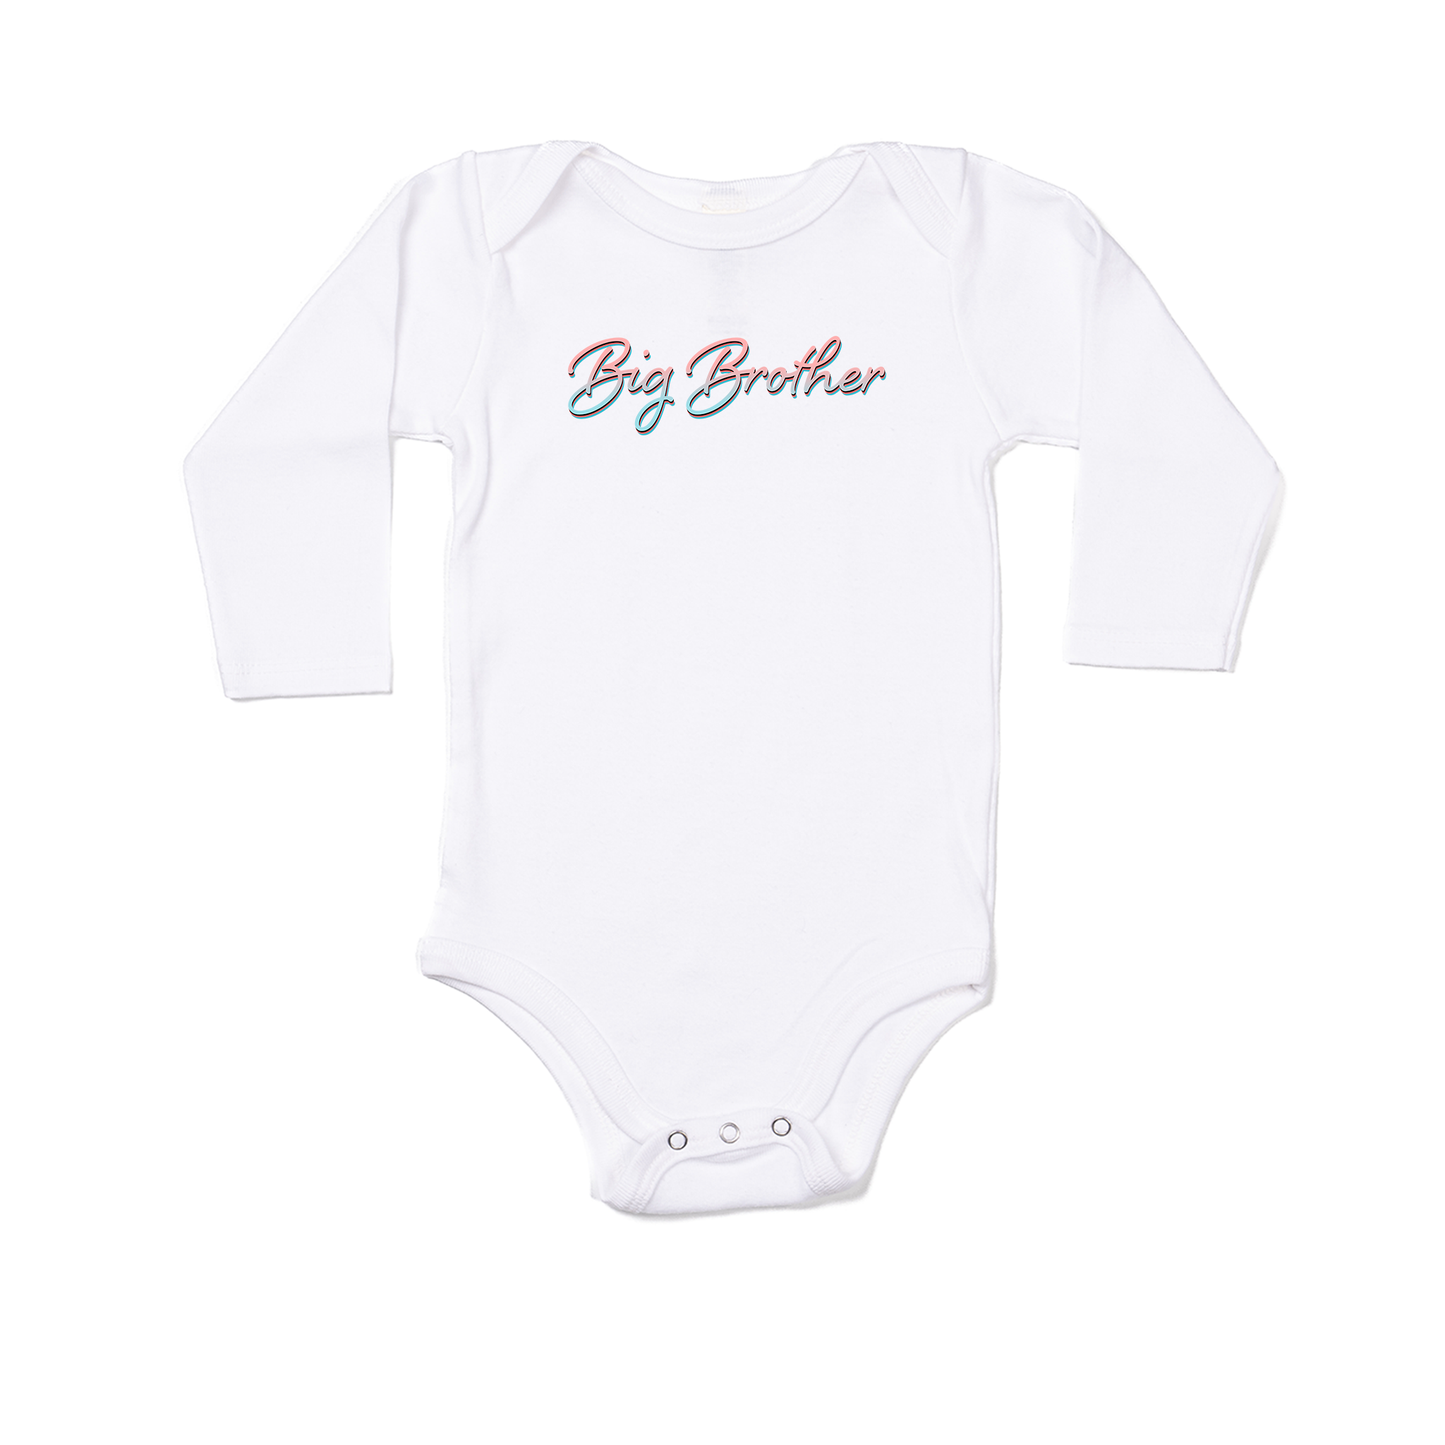 Big Brother (90's Inspired, Pink/Blue) - Bodysuit (White, Long Sleeve)